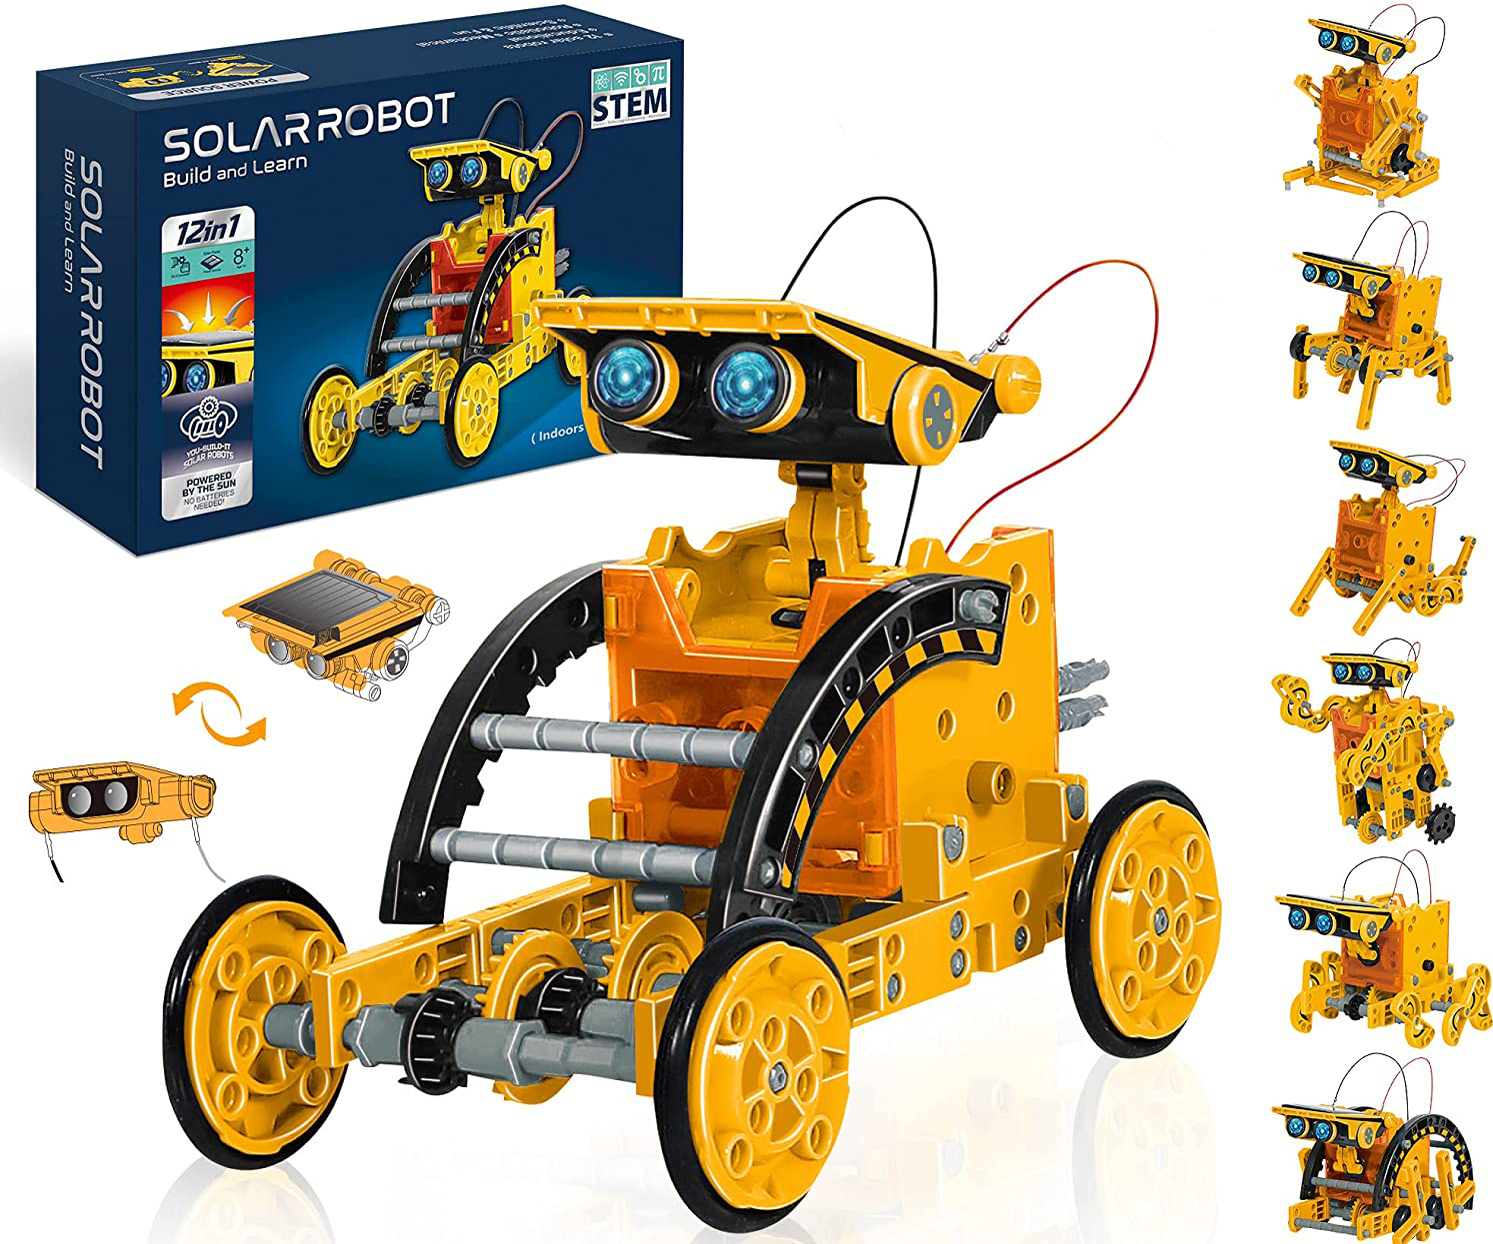 Lucky Doug Solar Robot Kit 12-in-1 Science STEM Toys Kids Aged 8-12 And Older, 